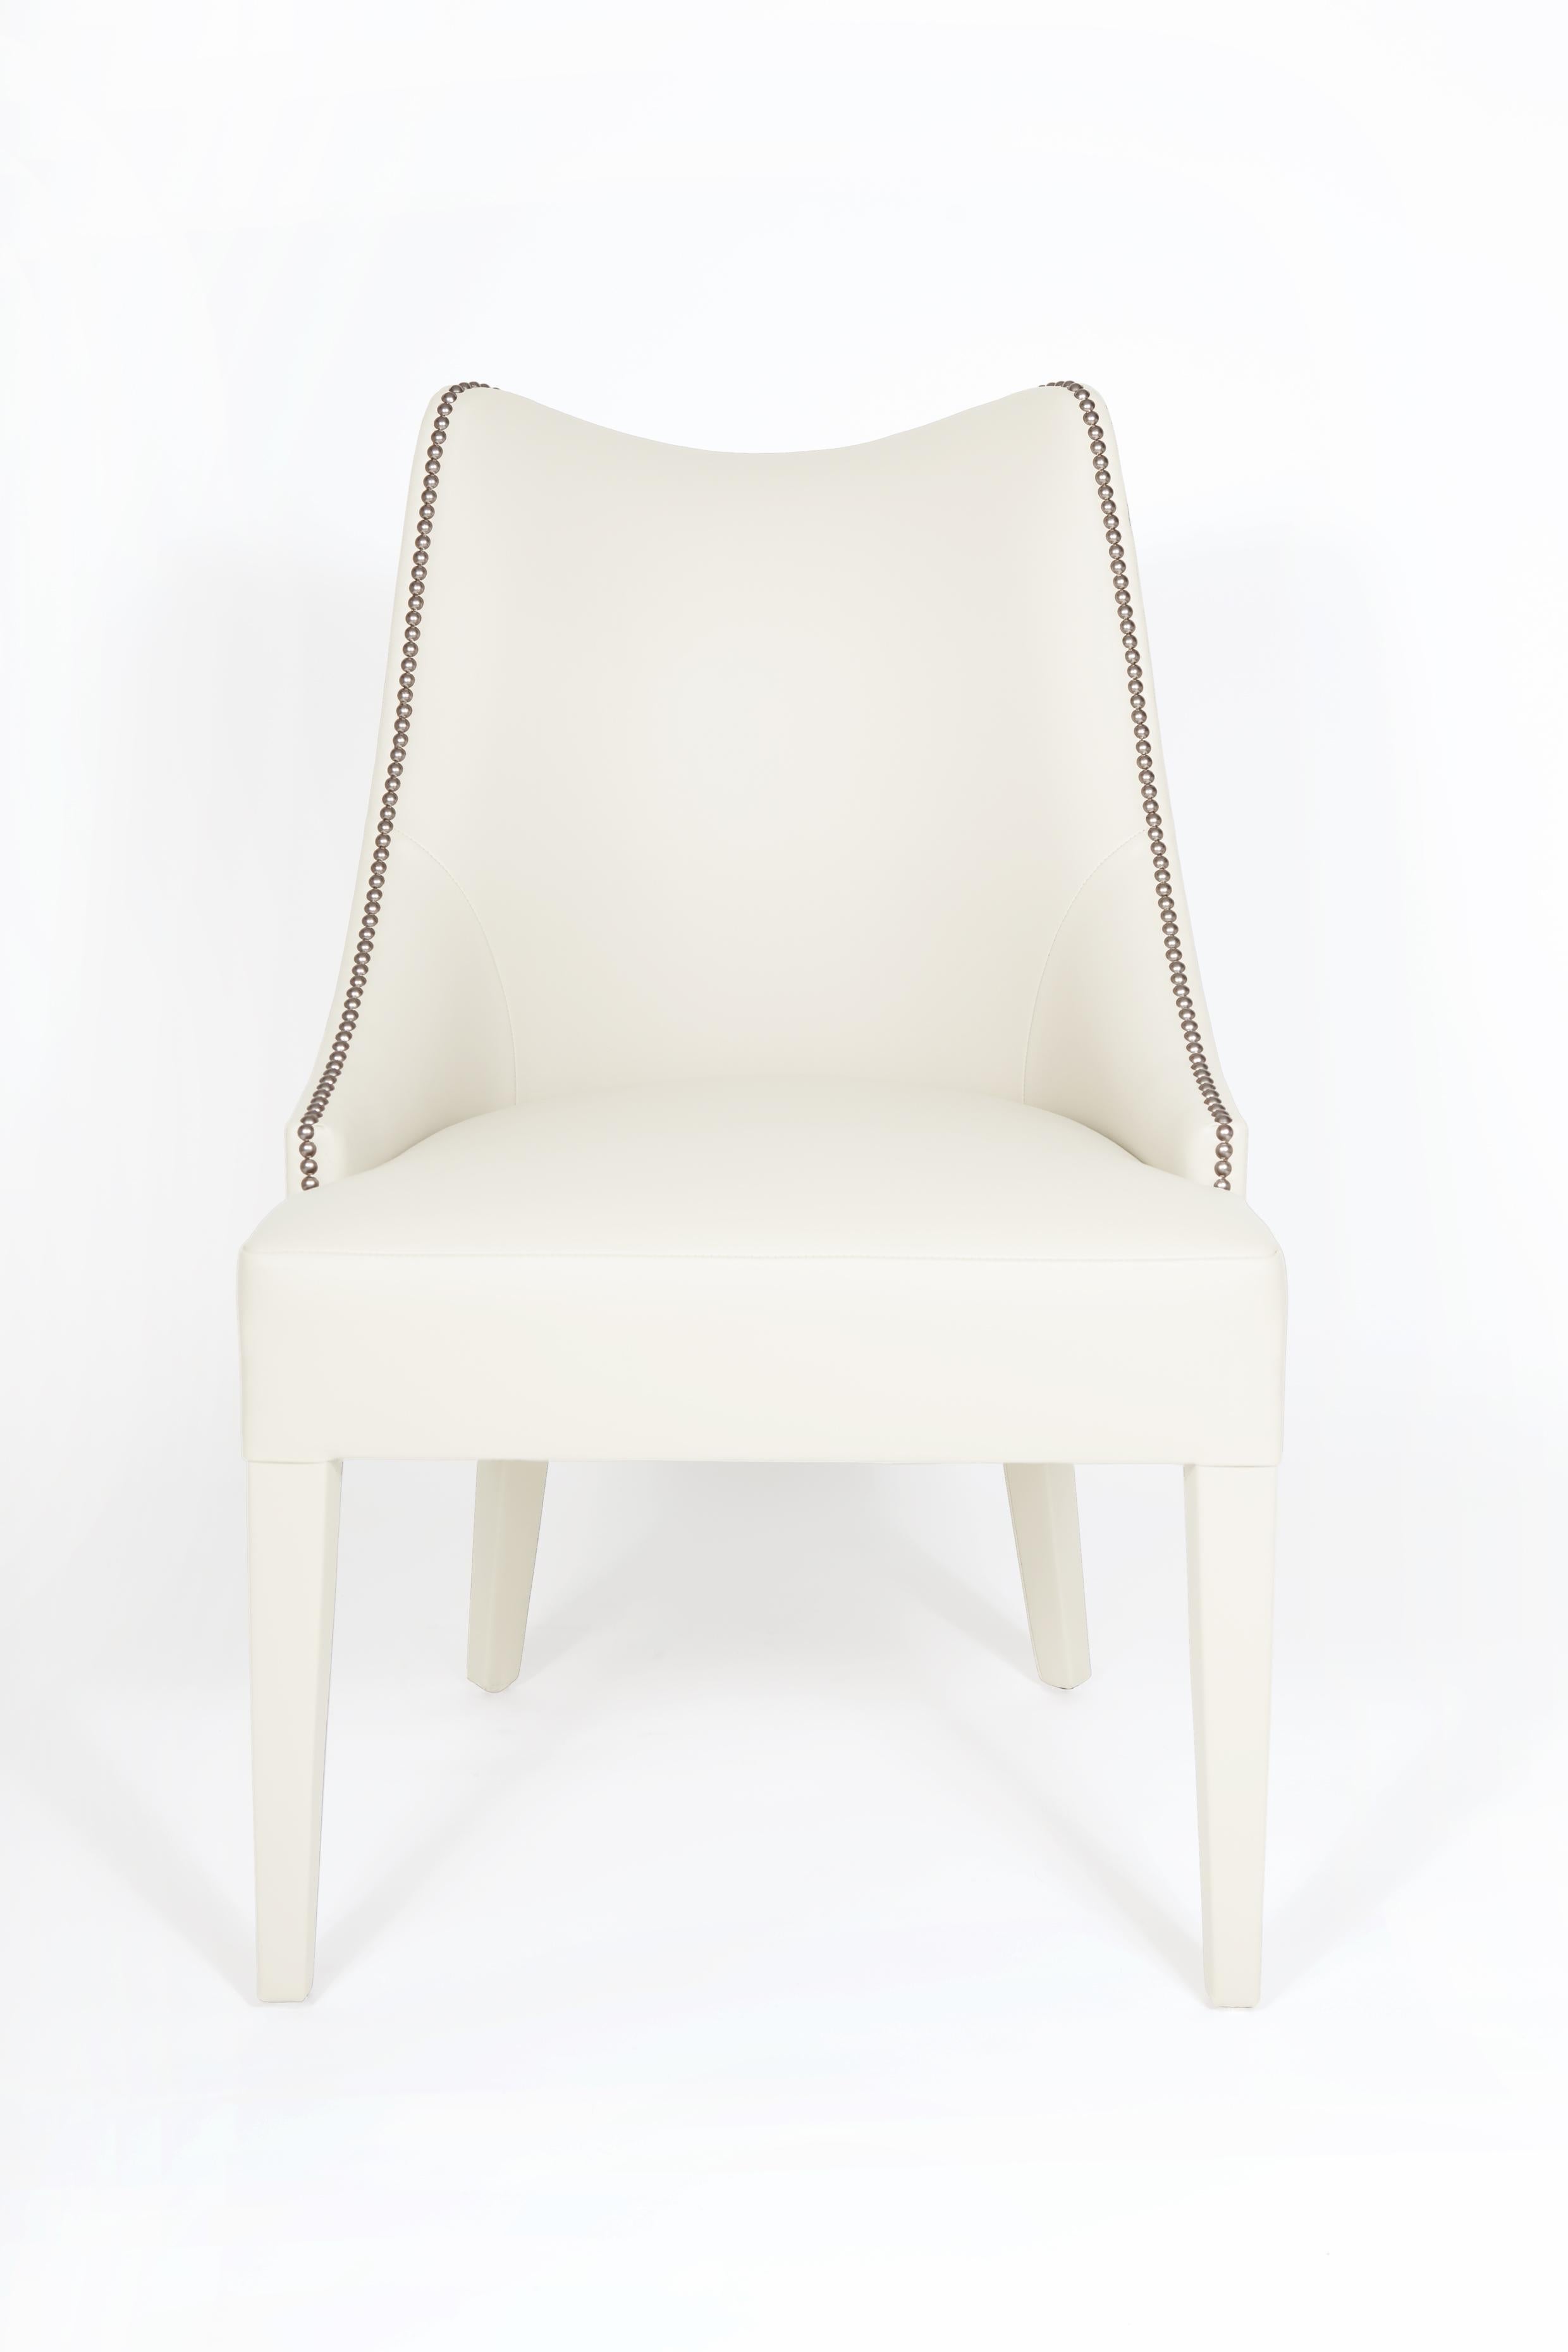 Contemporary Velvet Dining Chair Offered With Nails On The Curve & Back im Zustand „Neu“ im Angebot in New York, NY